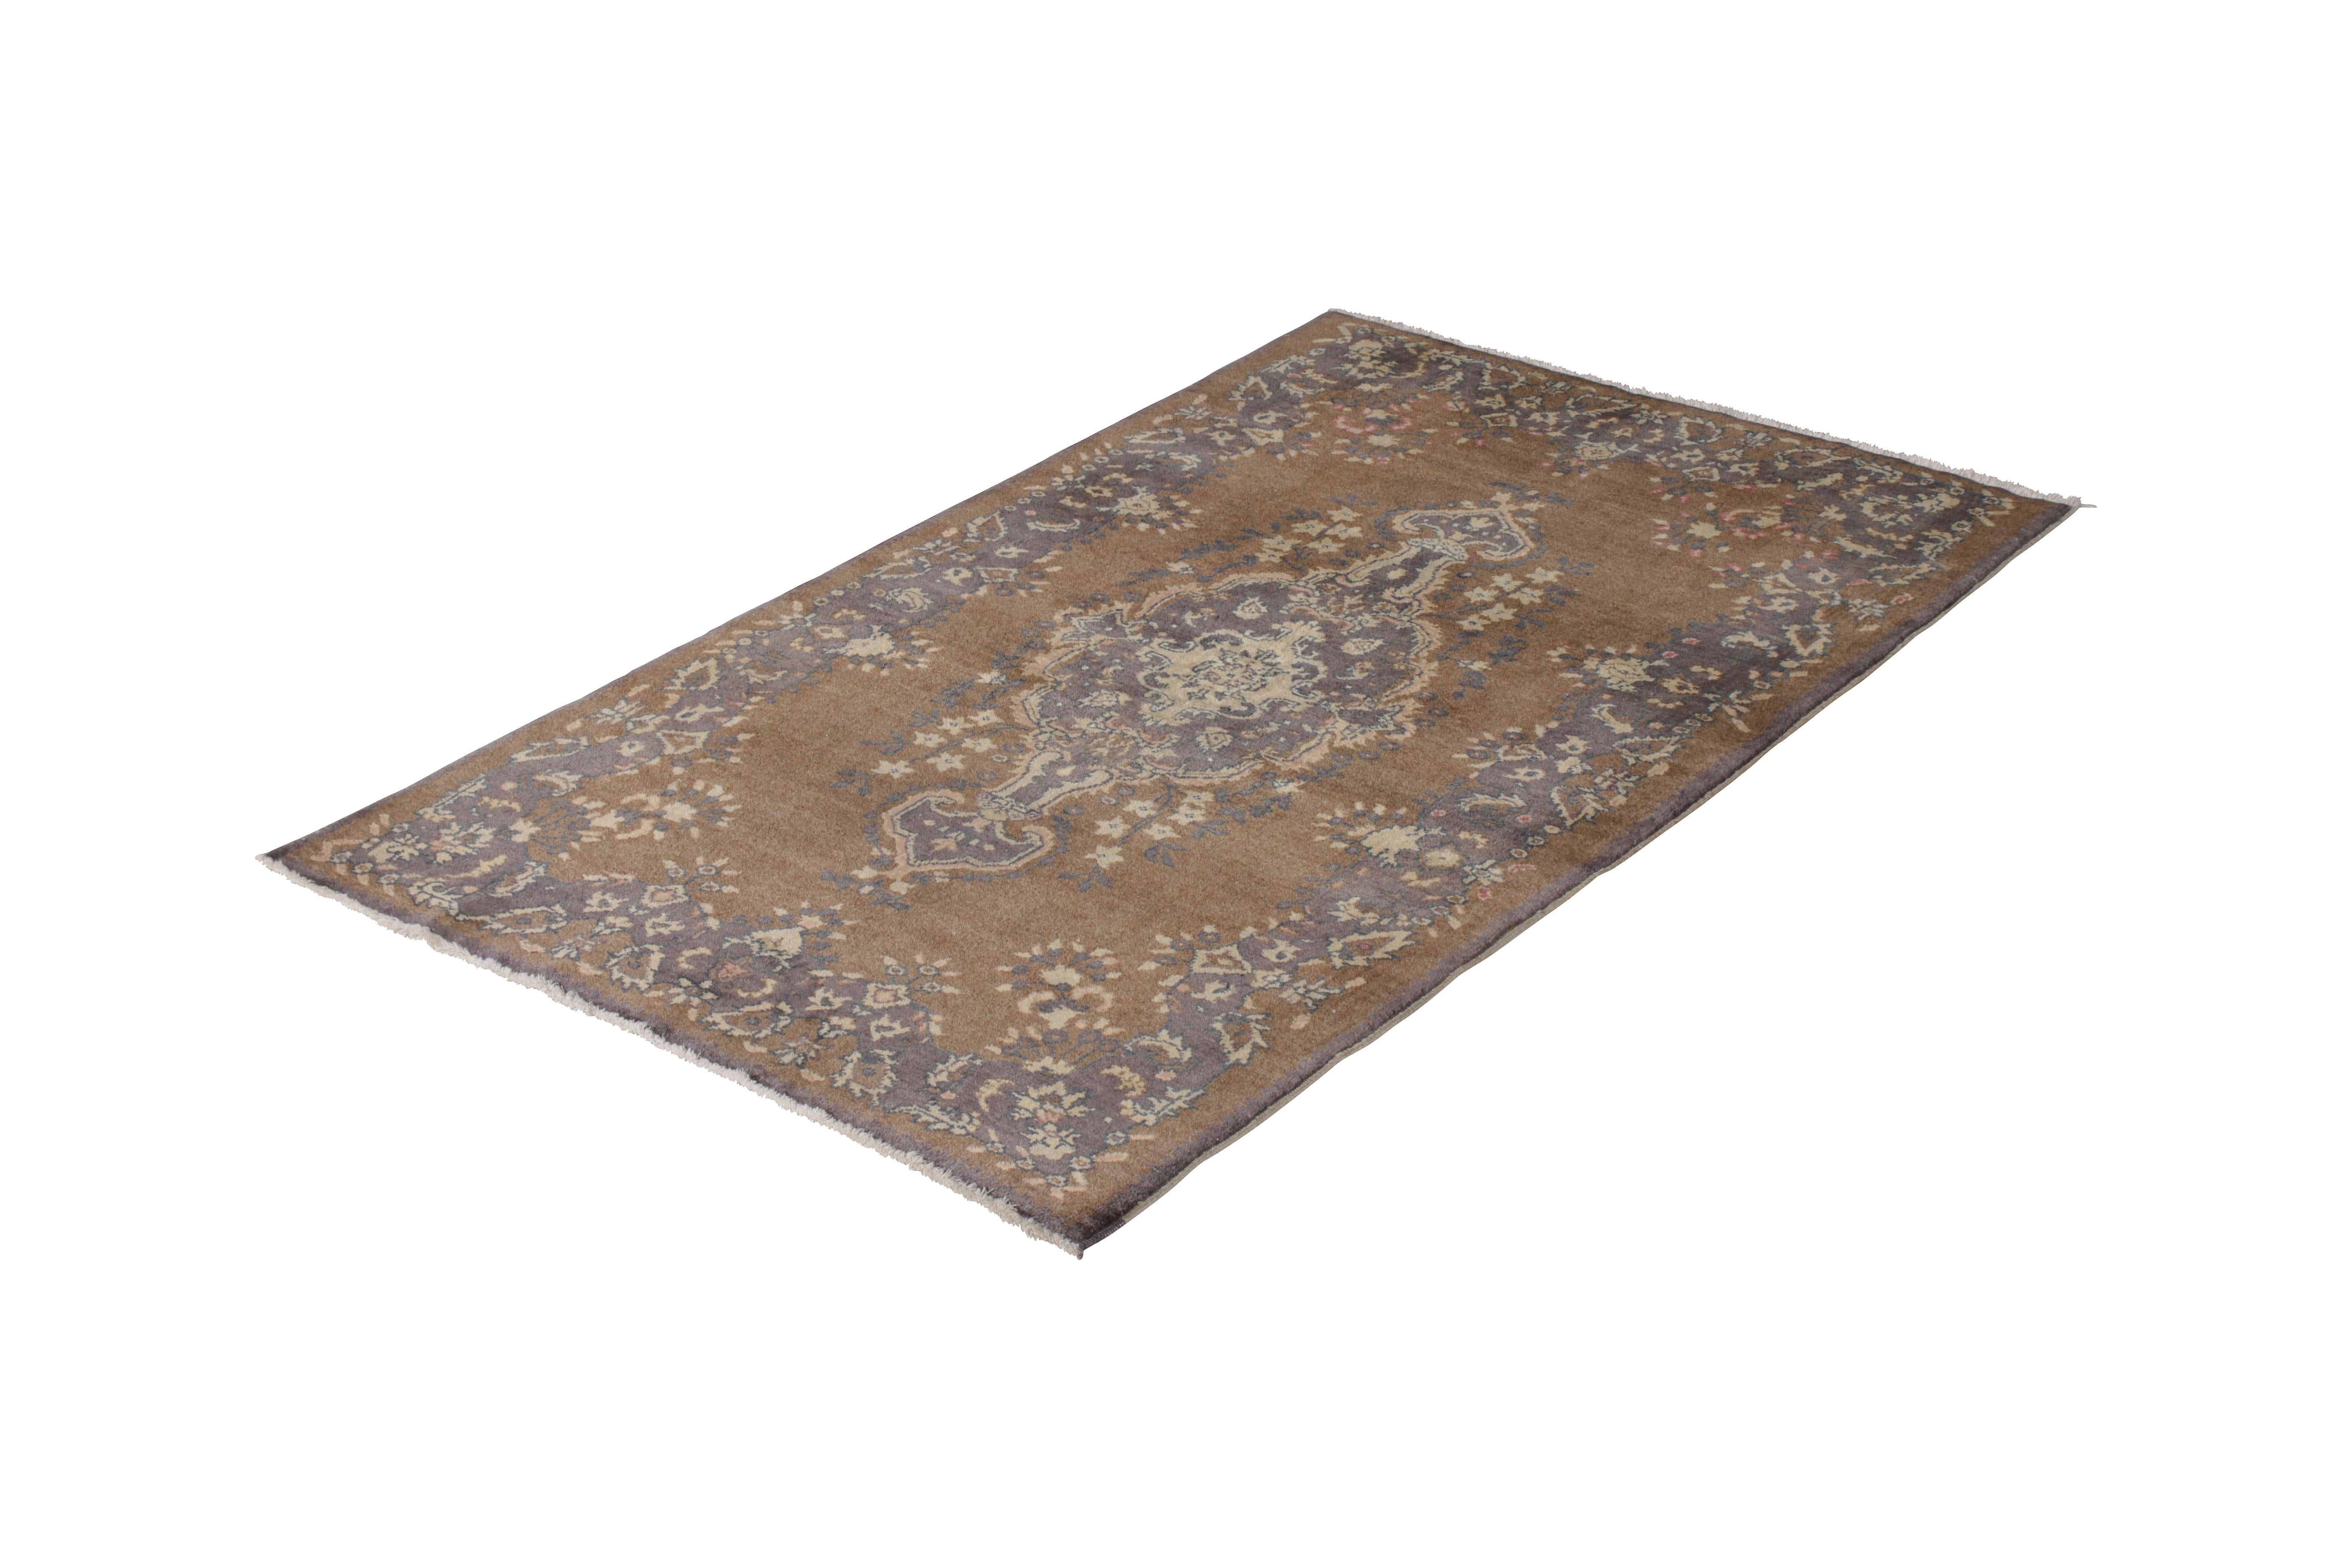 A 4 x 6 vintage rug of Sivas design, hand-knotted in wool originating from Turkey circa 1950-1960. A rare sibling of two 4 x 6 pieces, both in variations of this comfortable beige-brown, blue, and purple play. Available individually and together